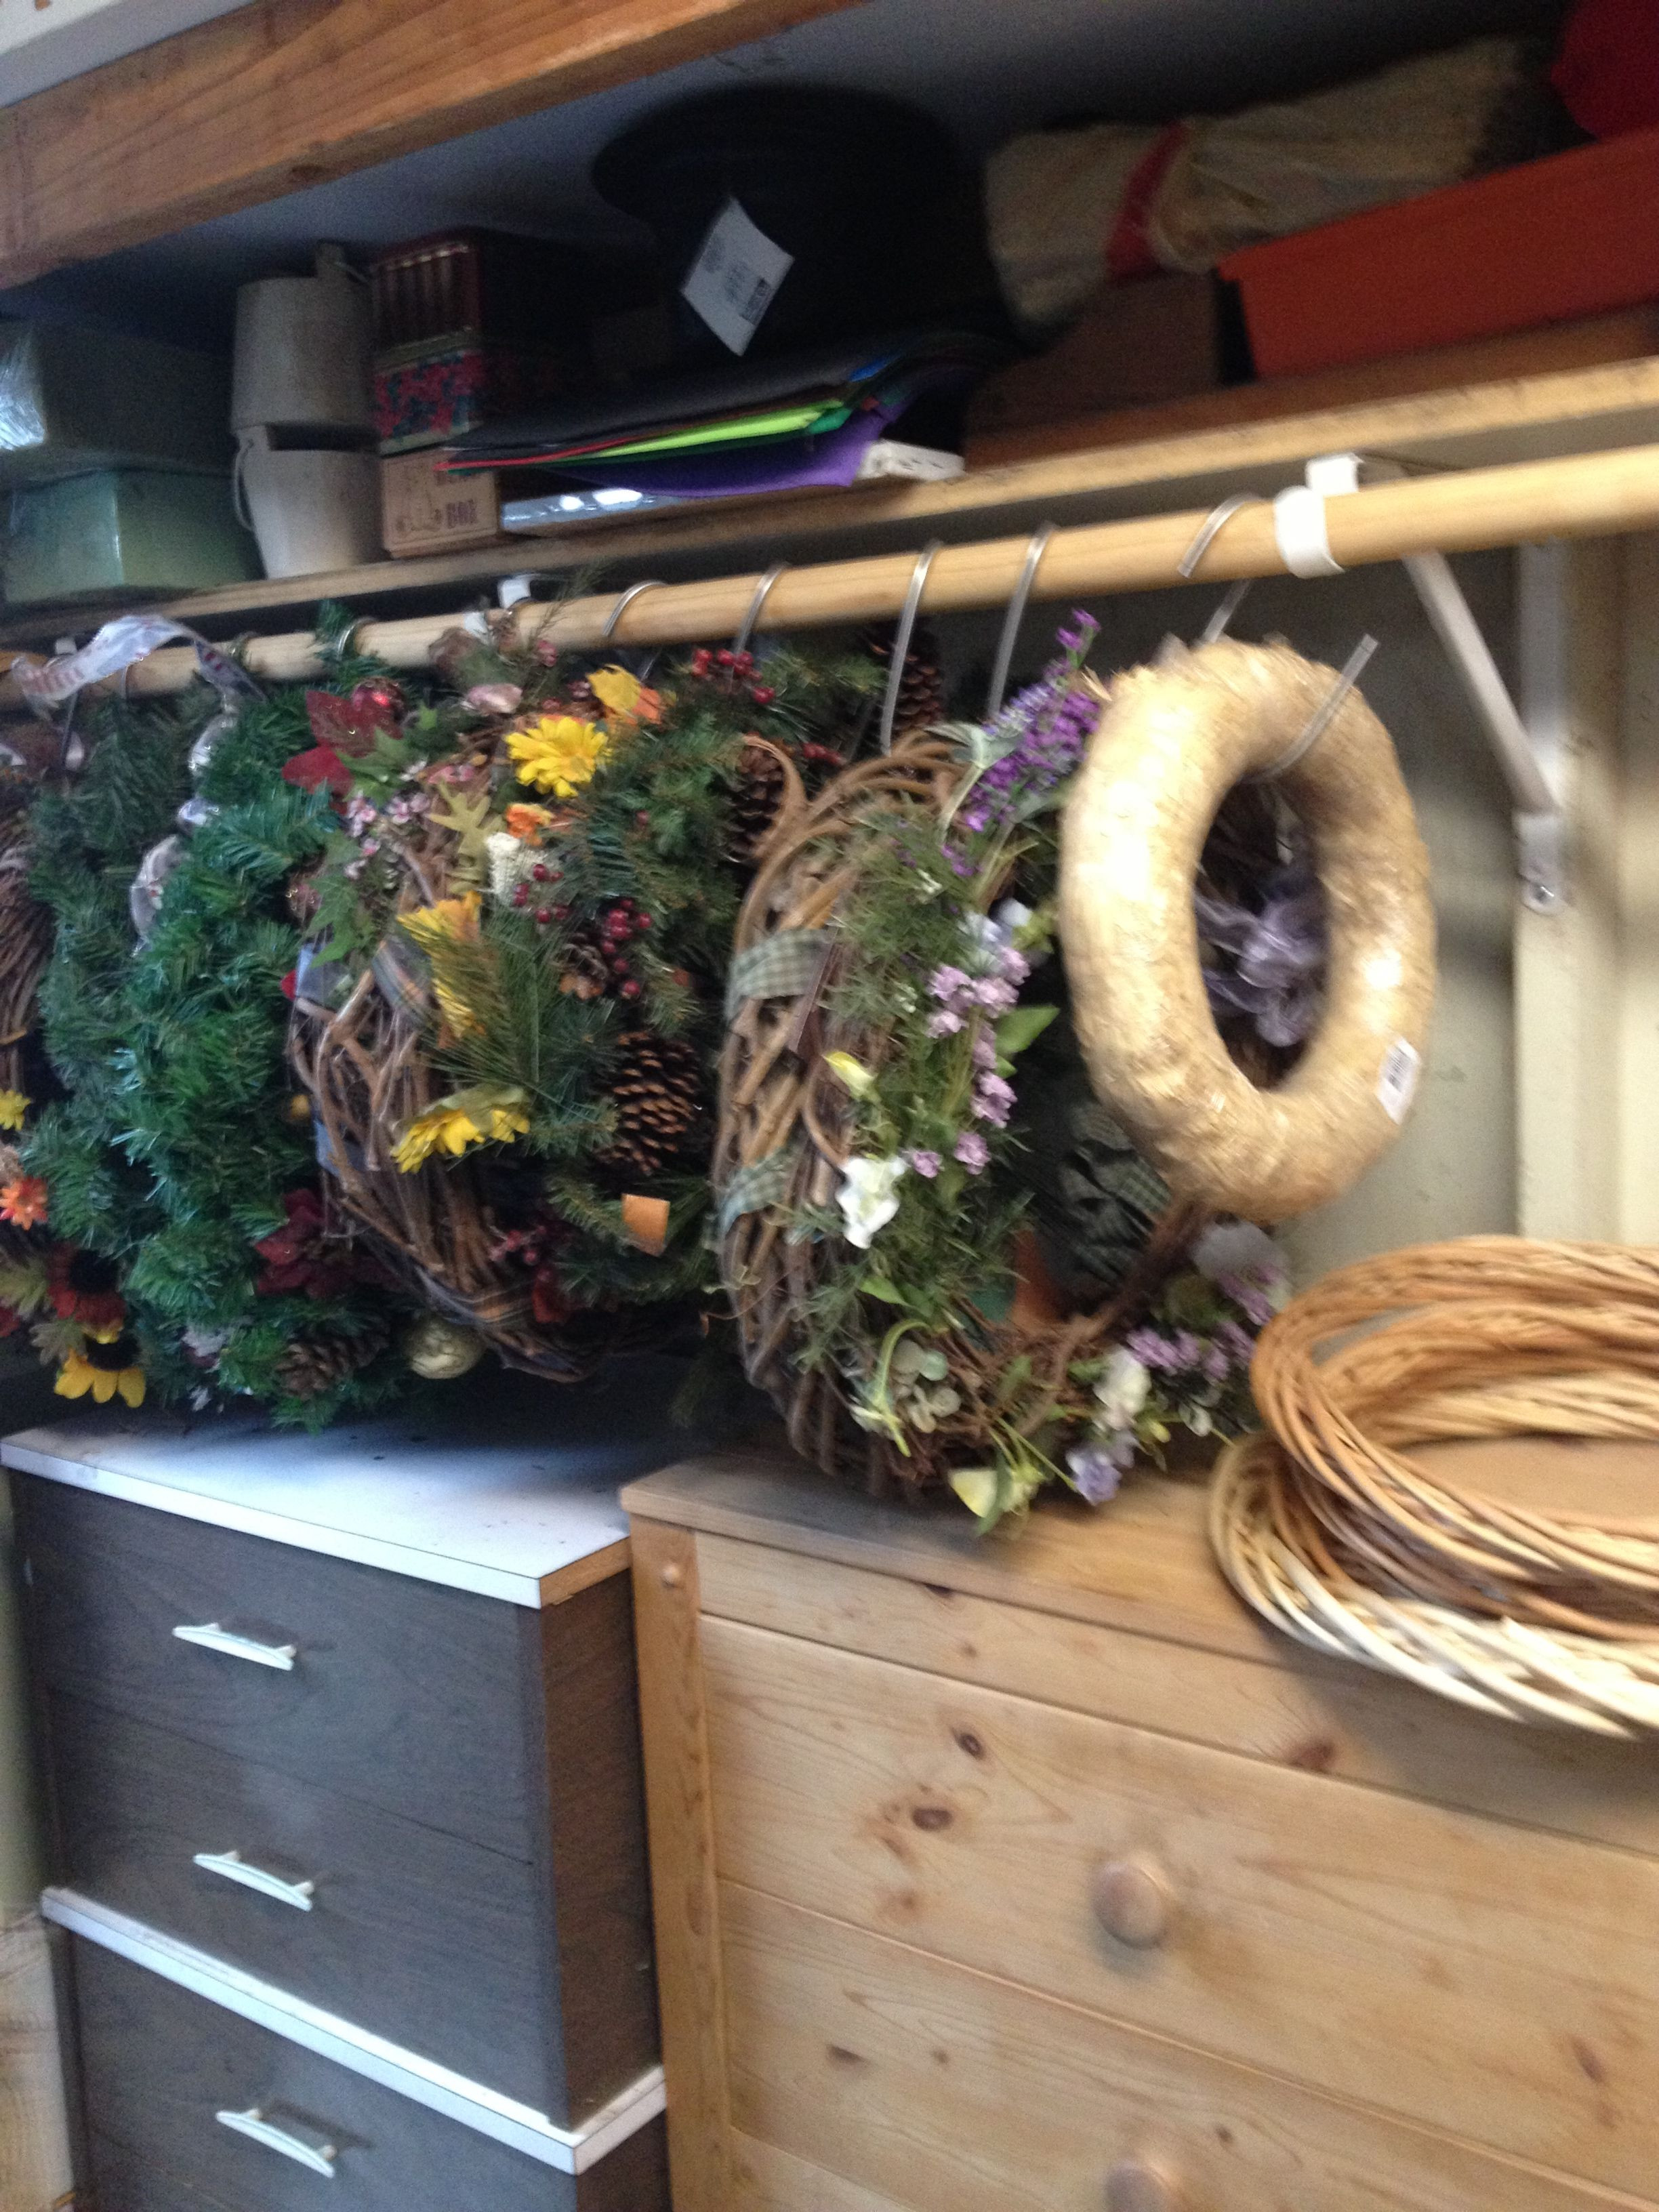 Christmas Wreath Storage
 Storage for wreaths Going to use a clothesline in storage